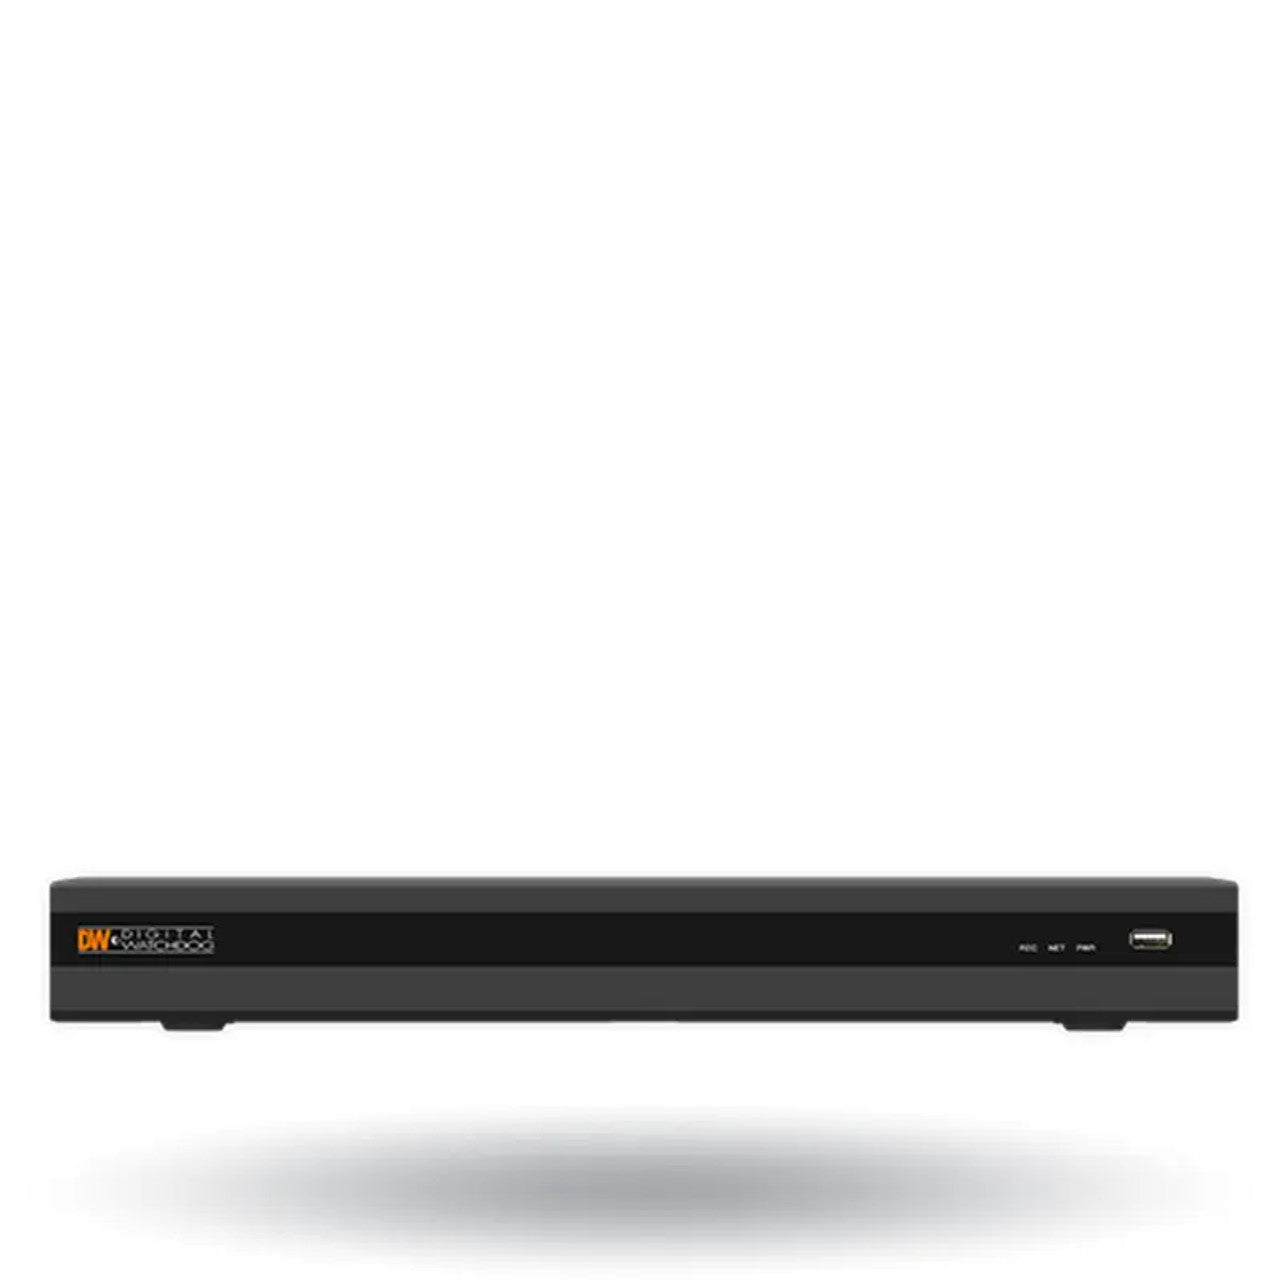 Digital Watchdog DW-VG4128T8P VMAX IP G4 8 Channel PoE NVR with 4 bonus channels with 8TB Hard Drive, 12-Channel